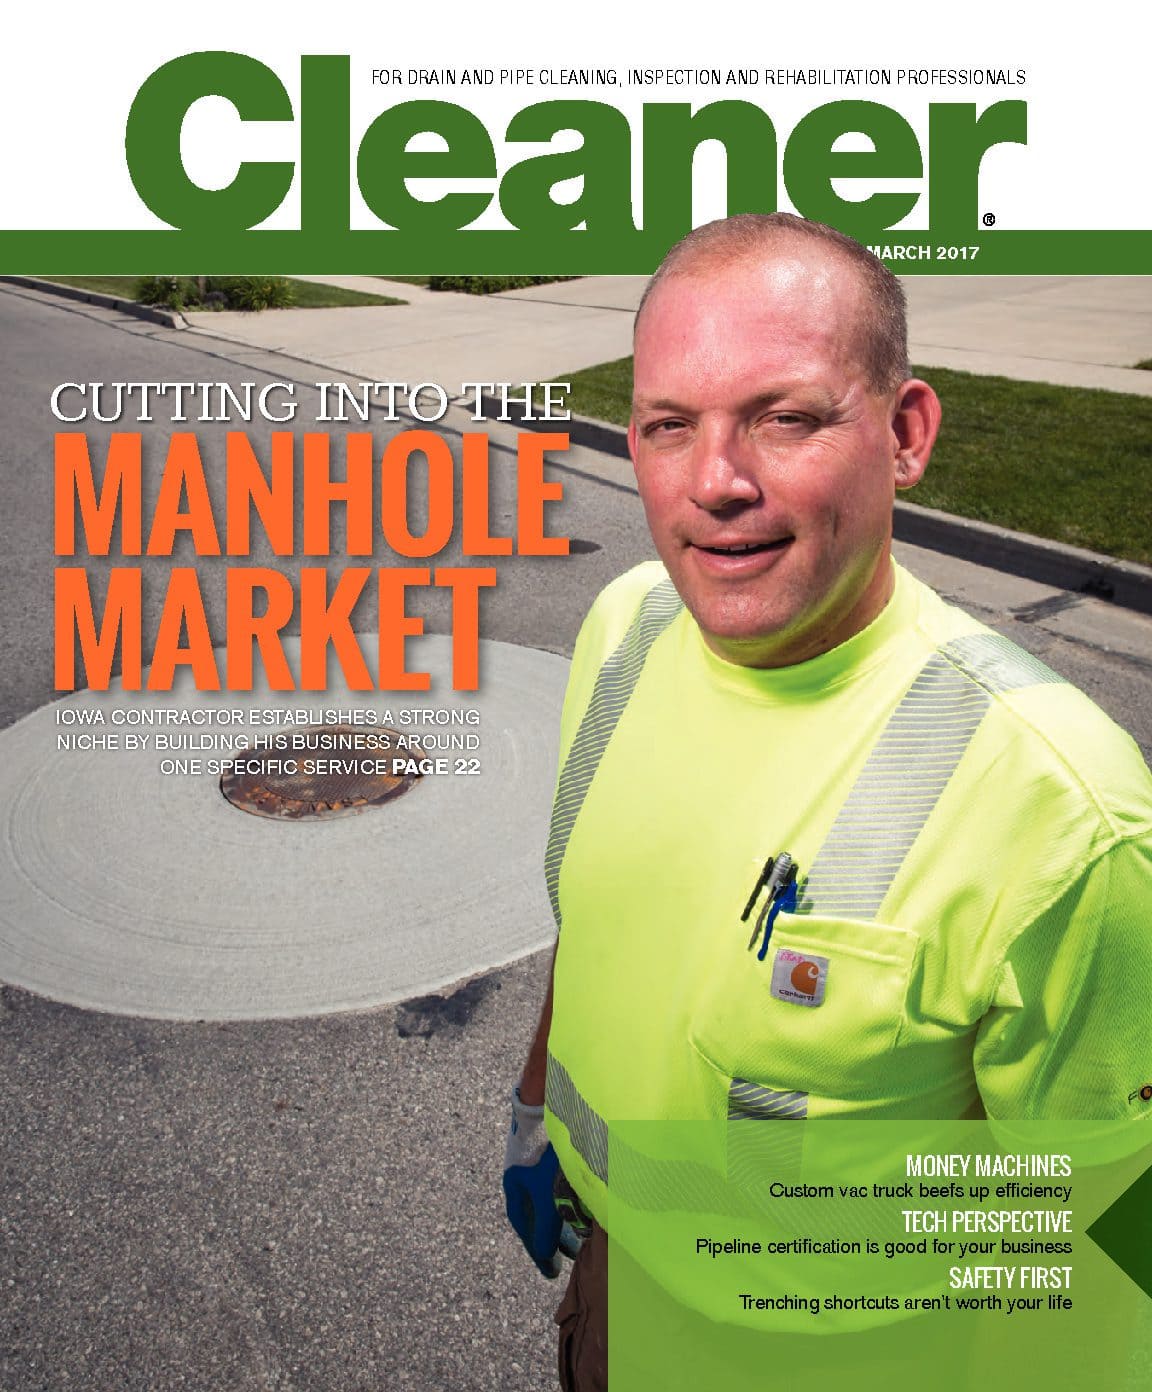 The Mr. Manhole method of manhole repair and rehabilitation was featured in the March 2017 edition of Clean magazine